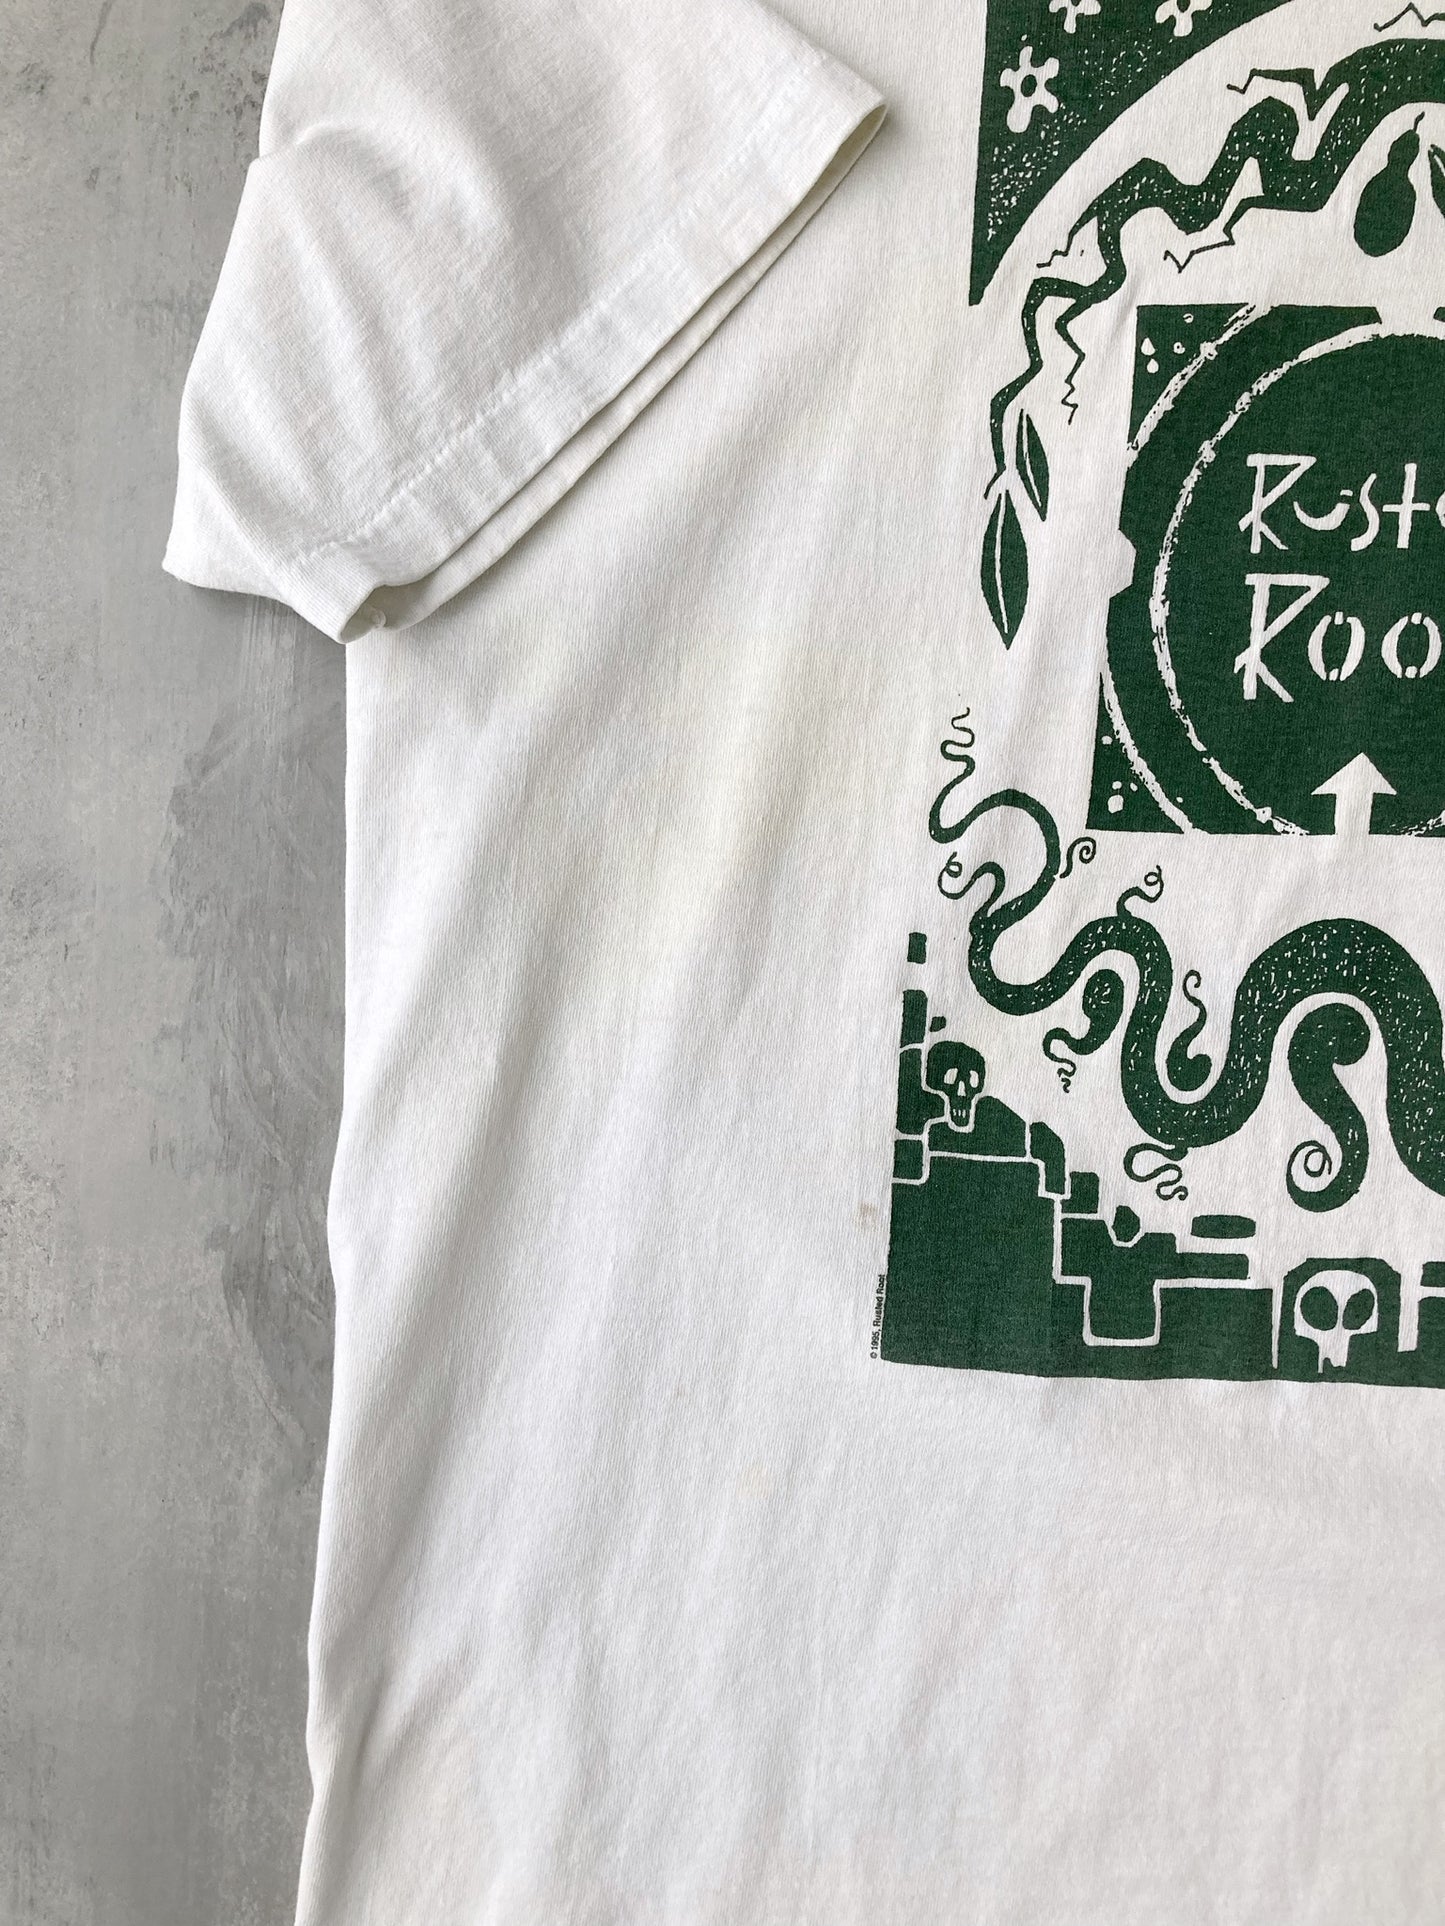 Rusted Root T-Shirt '95 - XL